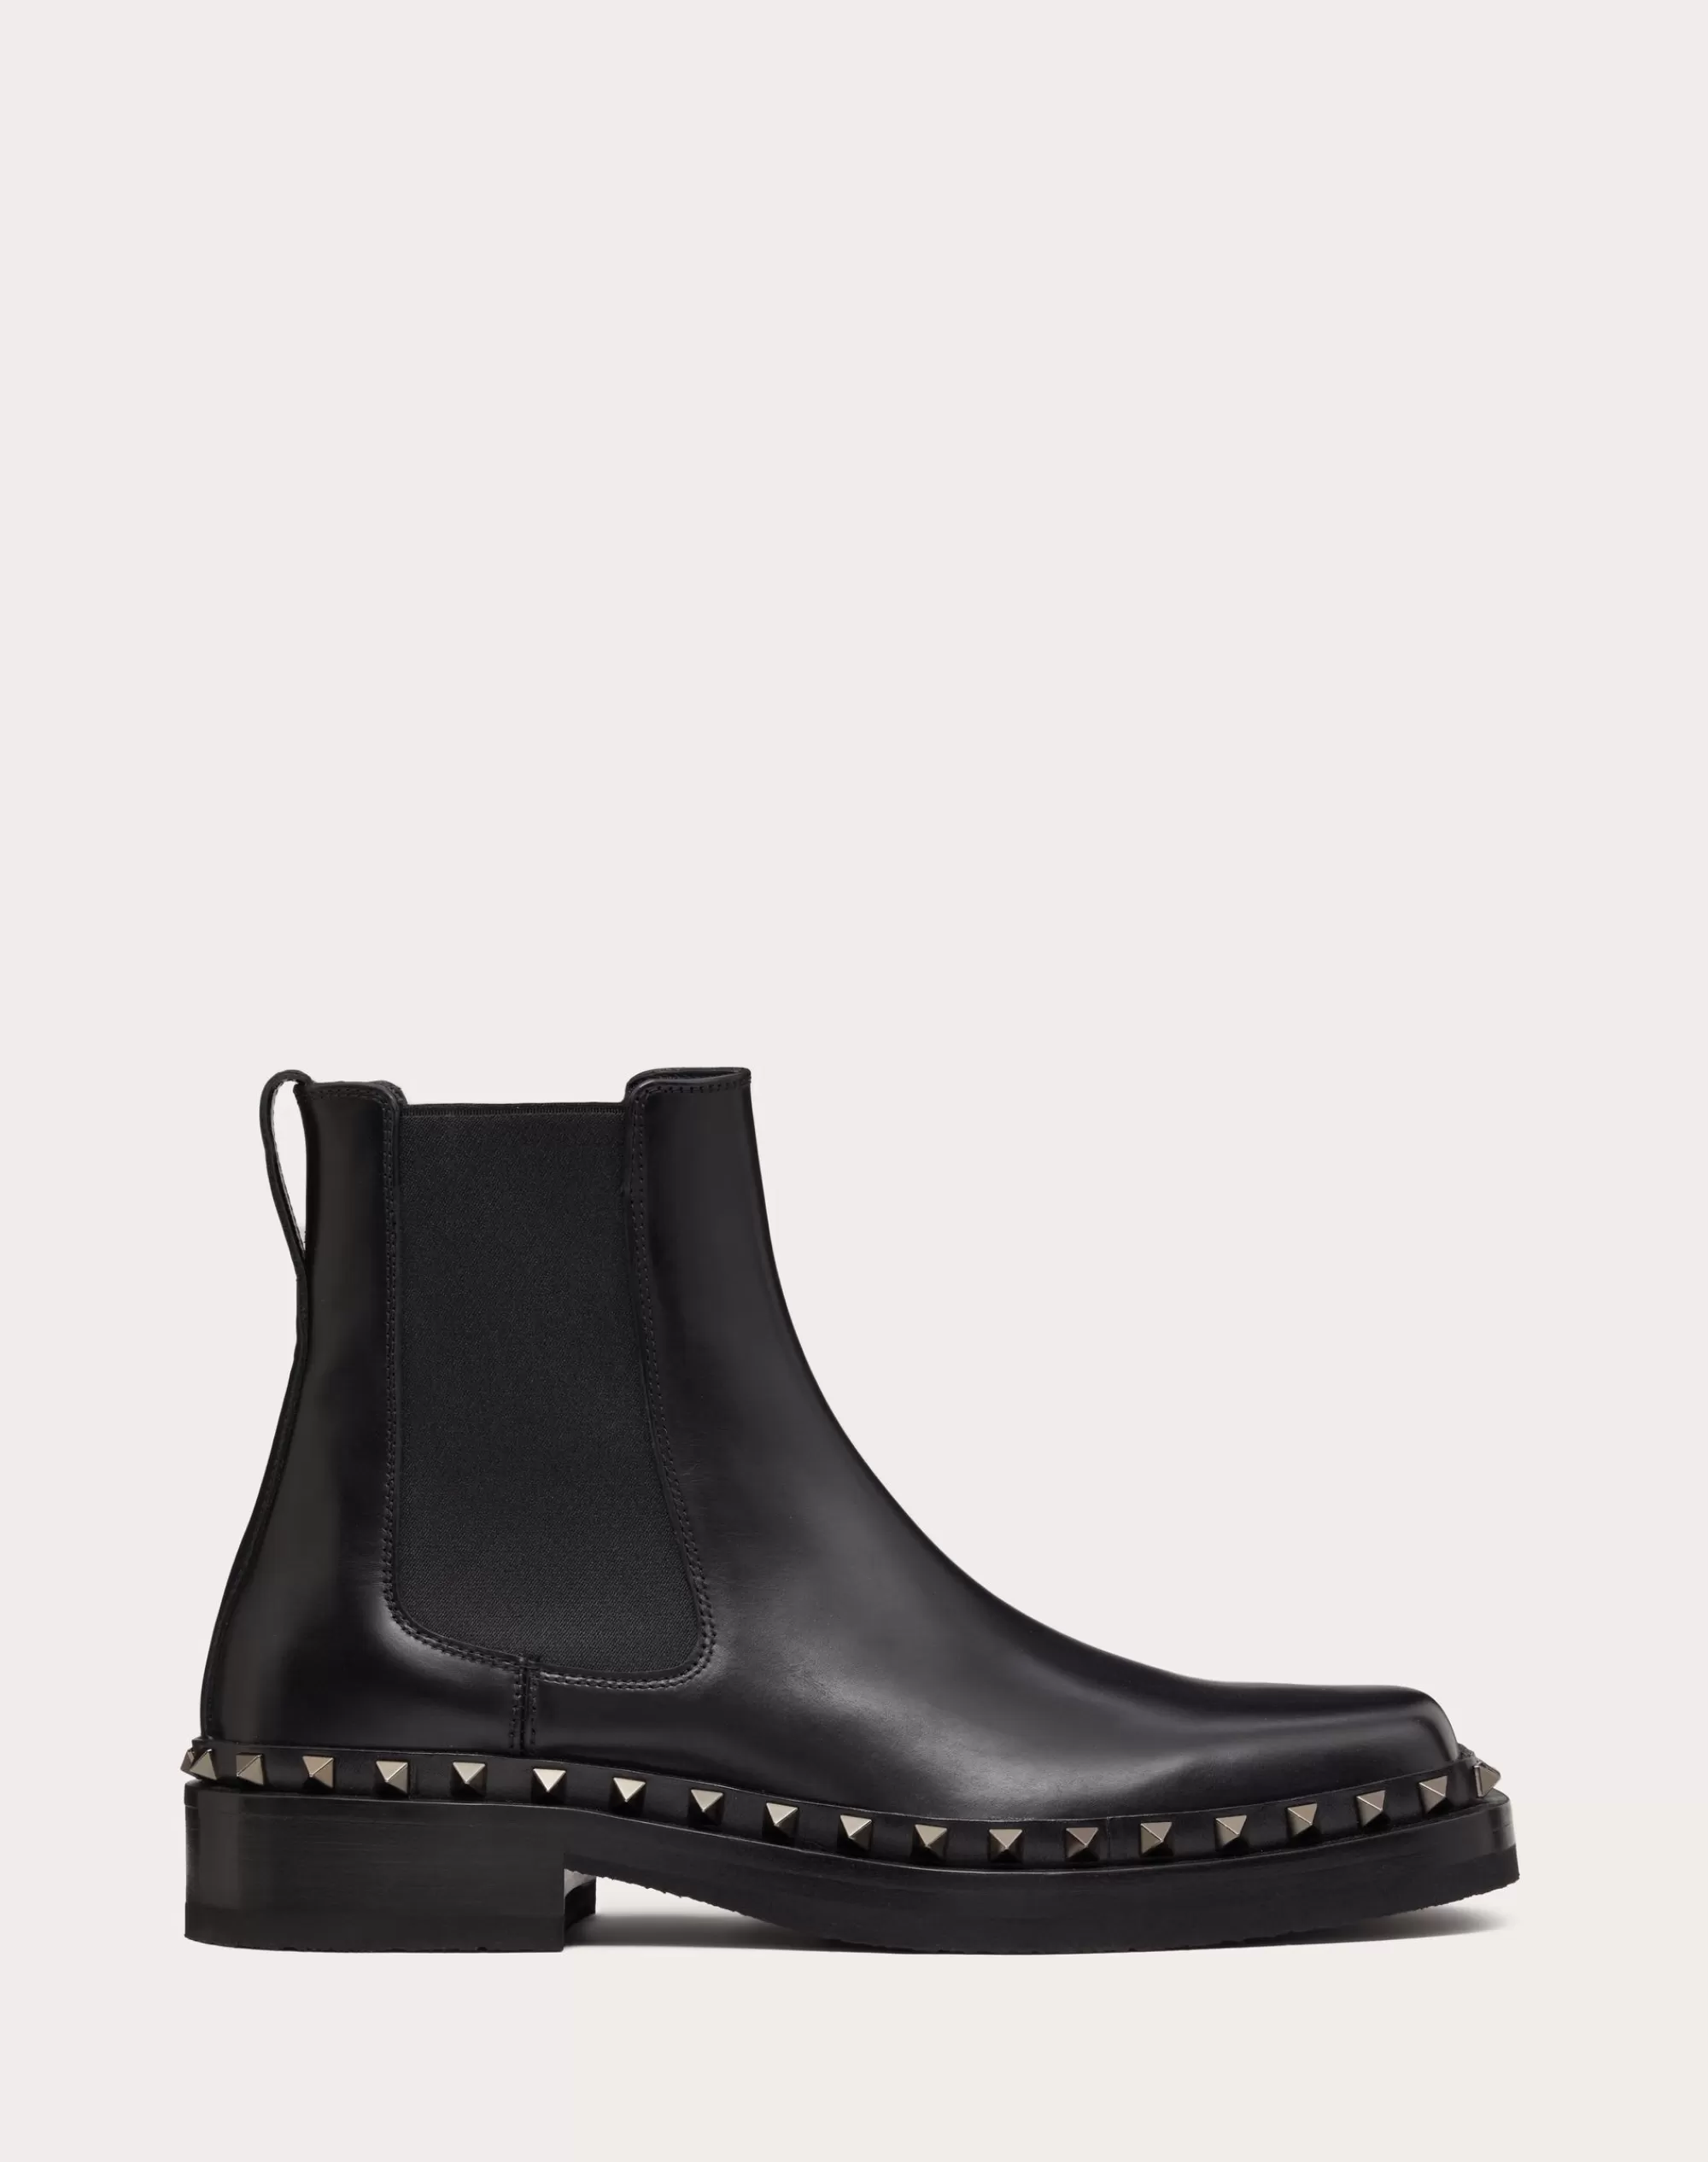 Valentino M-WAY ROCKSTUD ANKLE BOOT IN CALFSKIN LEATHER Black New